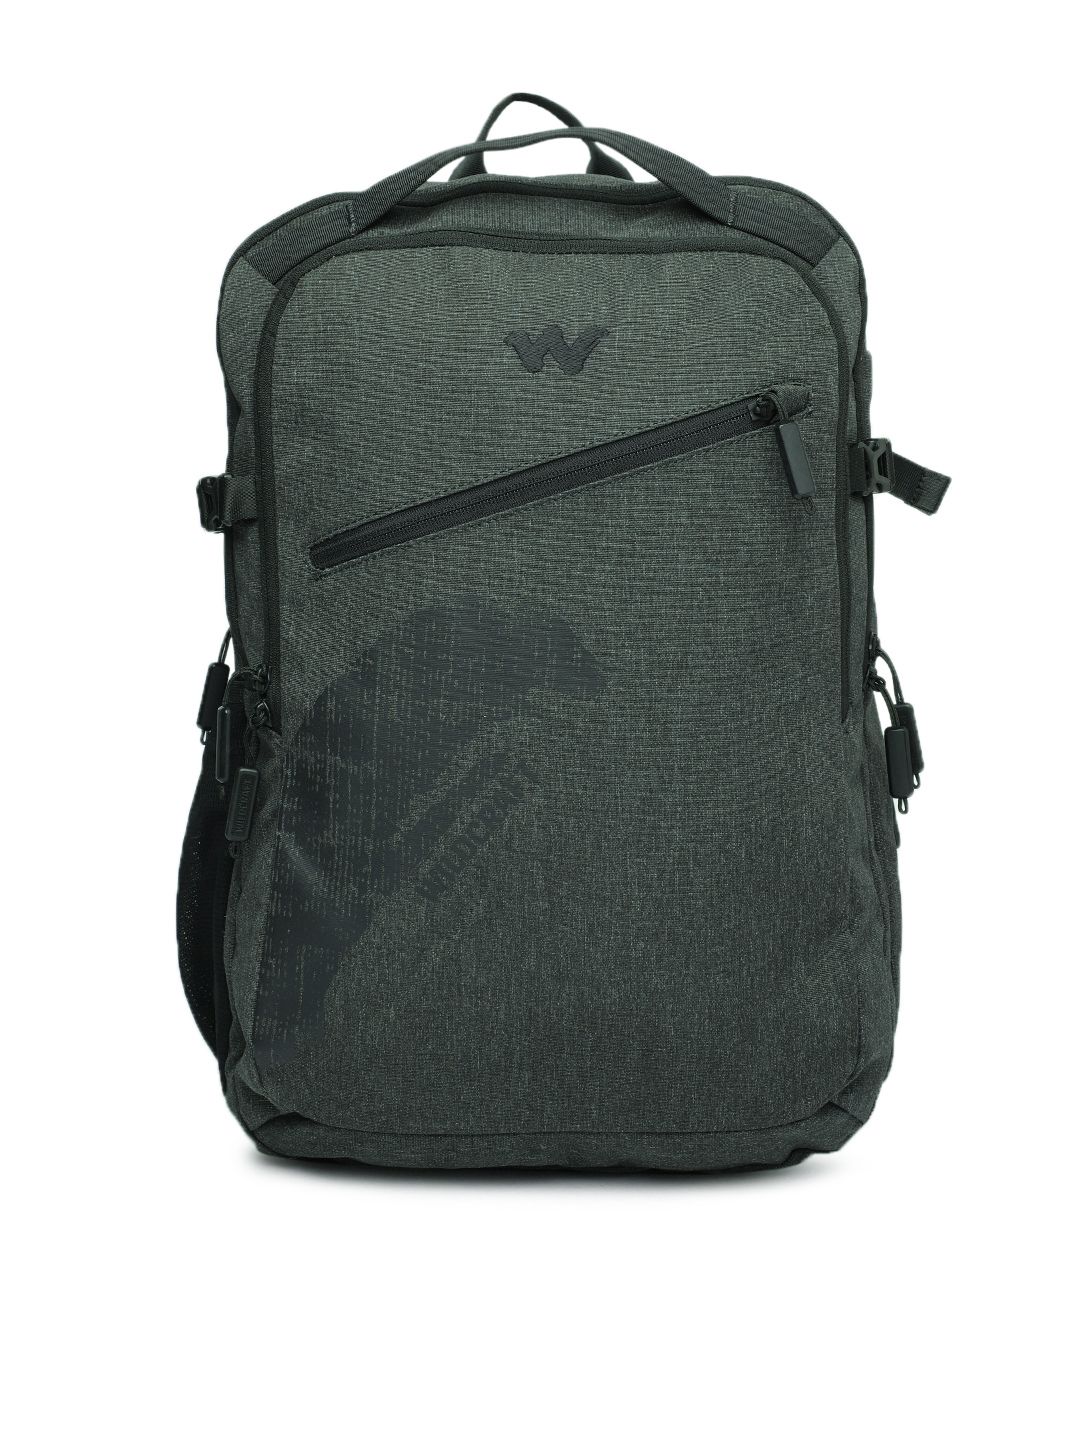 Wildcraft Unisex Charcoal Spruce Solid Backpack Price in India